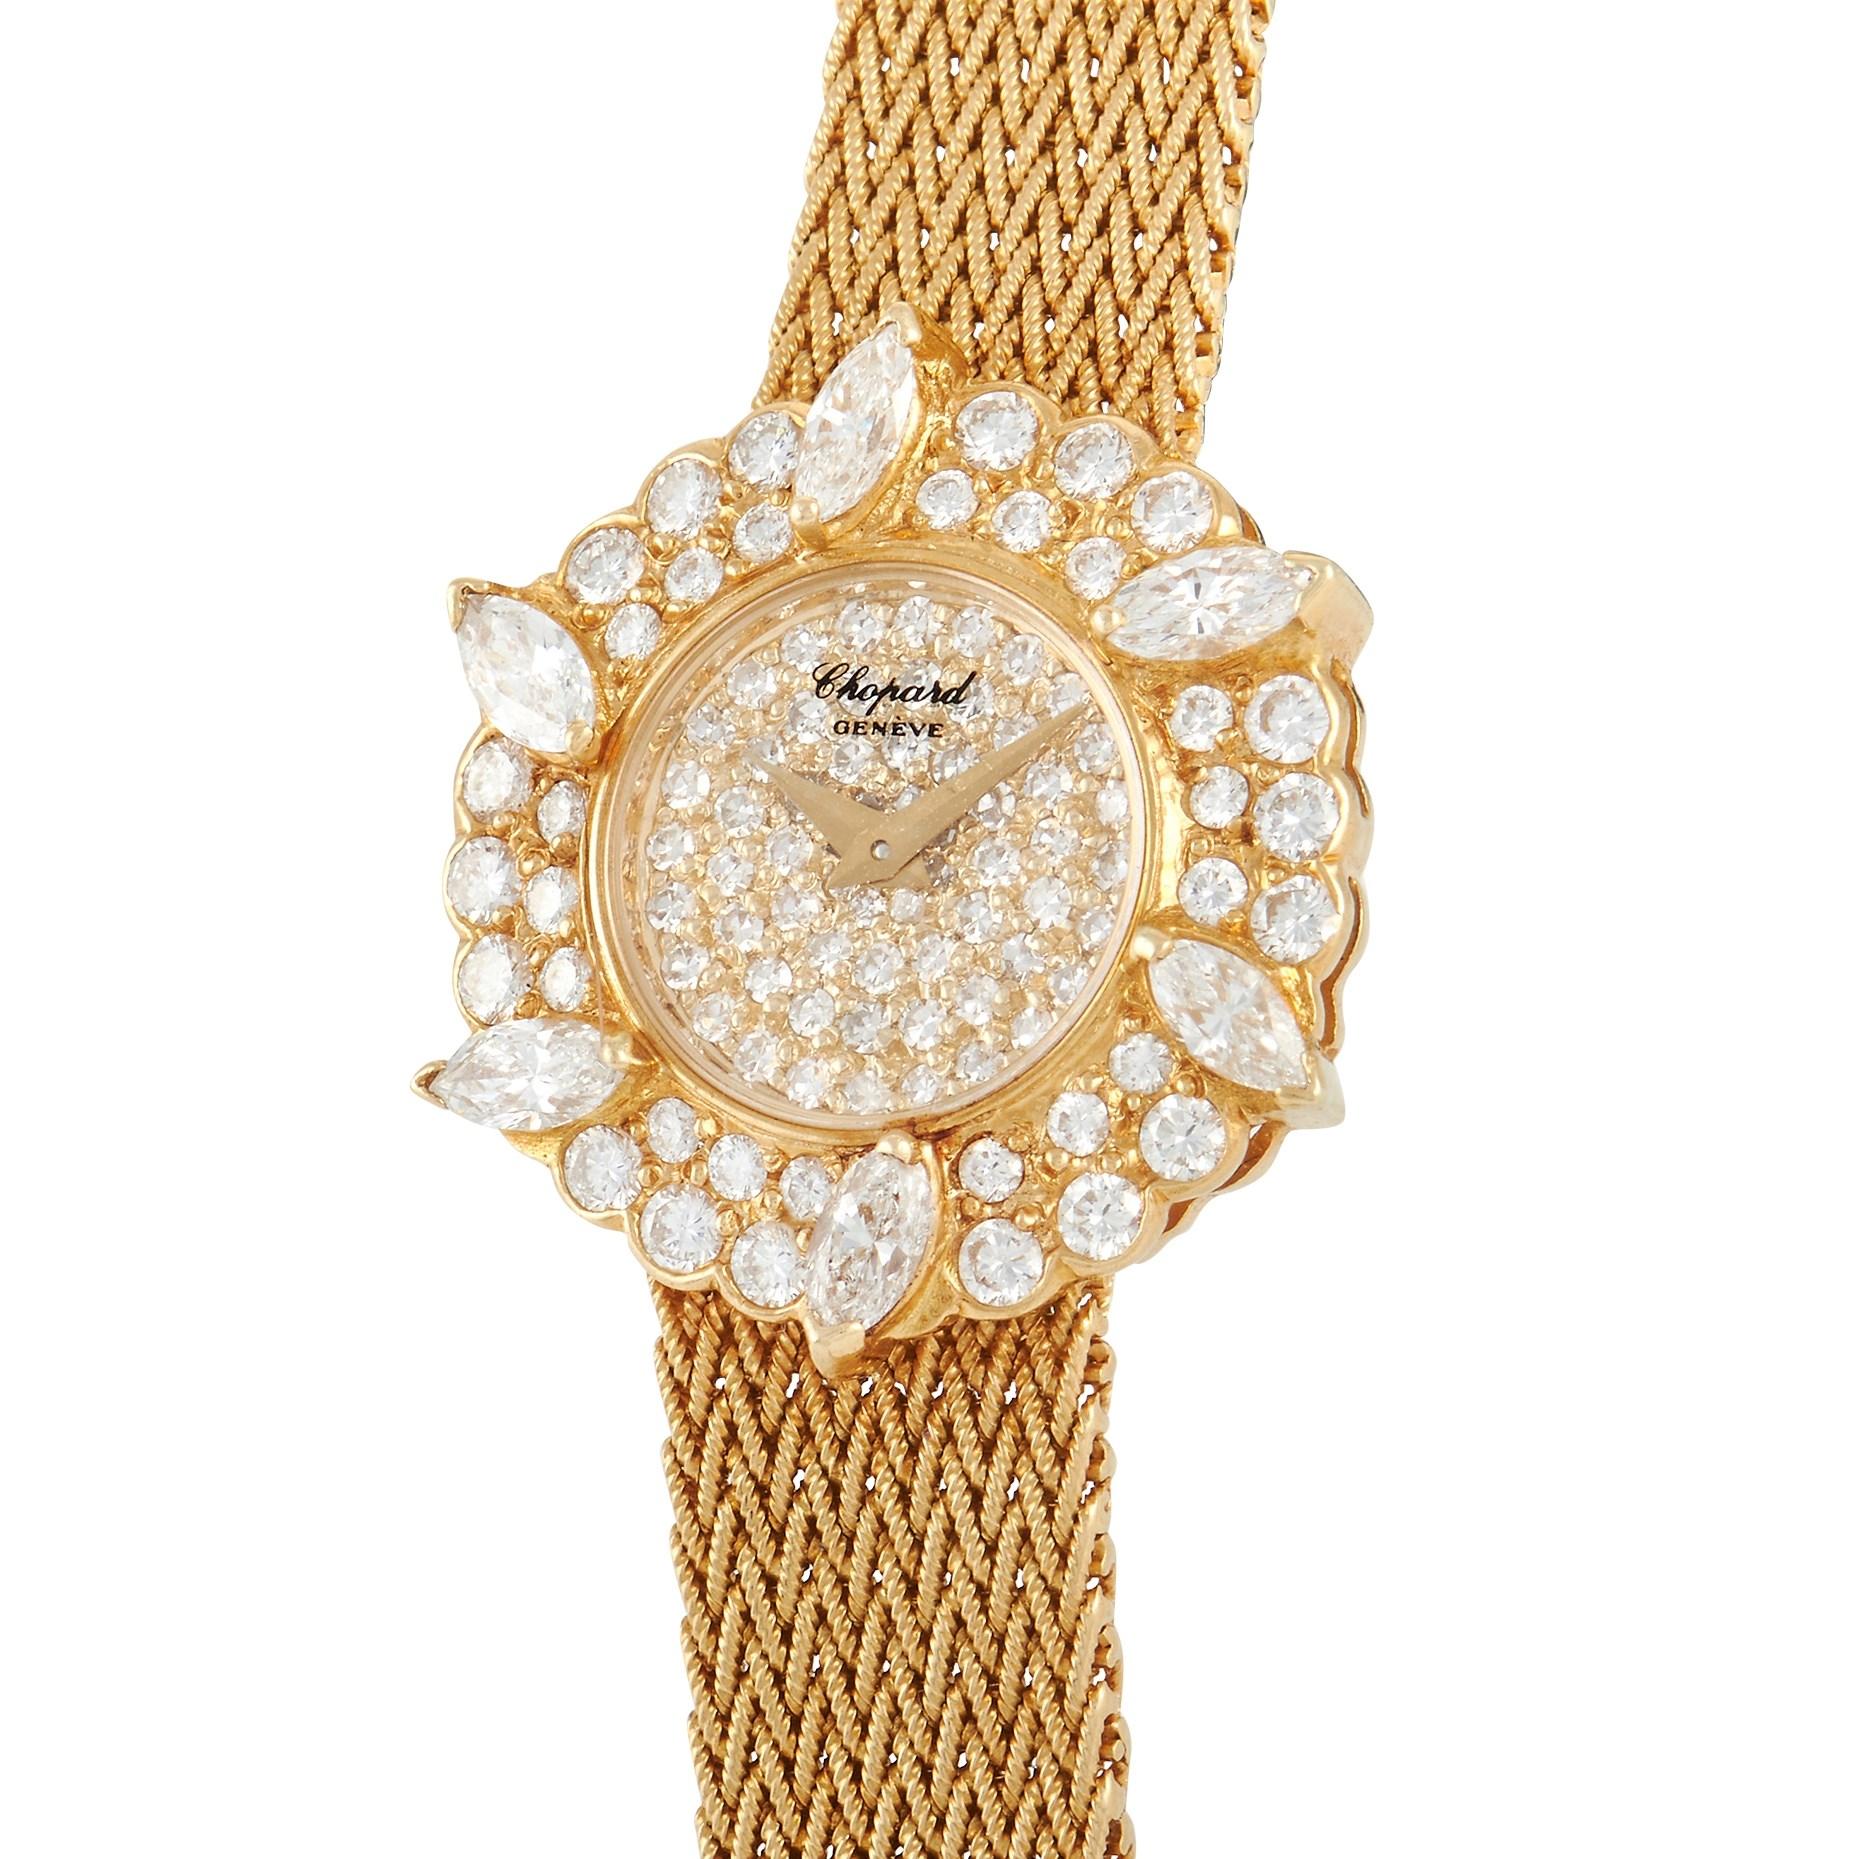 Elegantly embodying Chopard's fine jewelry expertise is this diamond-encrusted timepiece with a floral motif. The Chopard 18K Yellow Gold Diamond Ladies Watch features a yellow gold case with a diamond-covered numberless face. Dauphine hands in